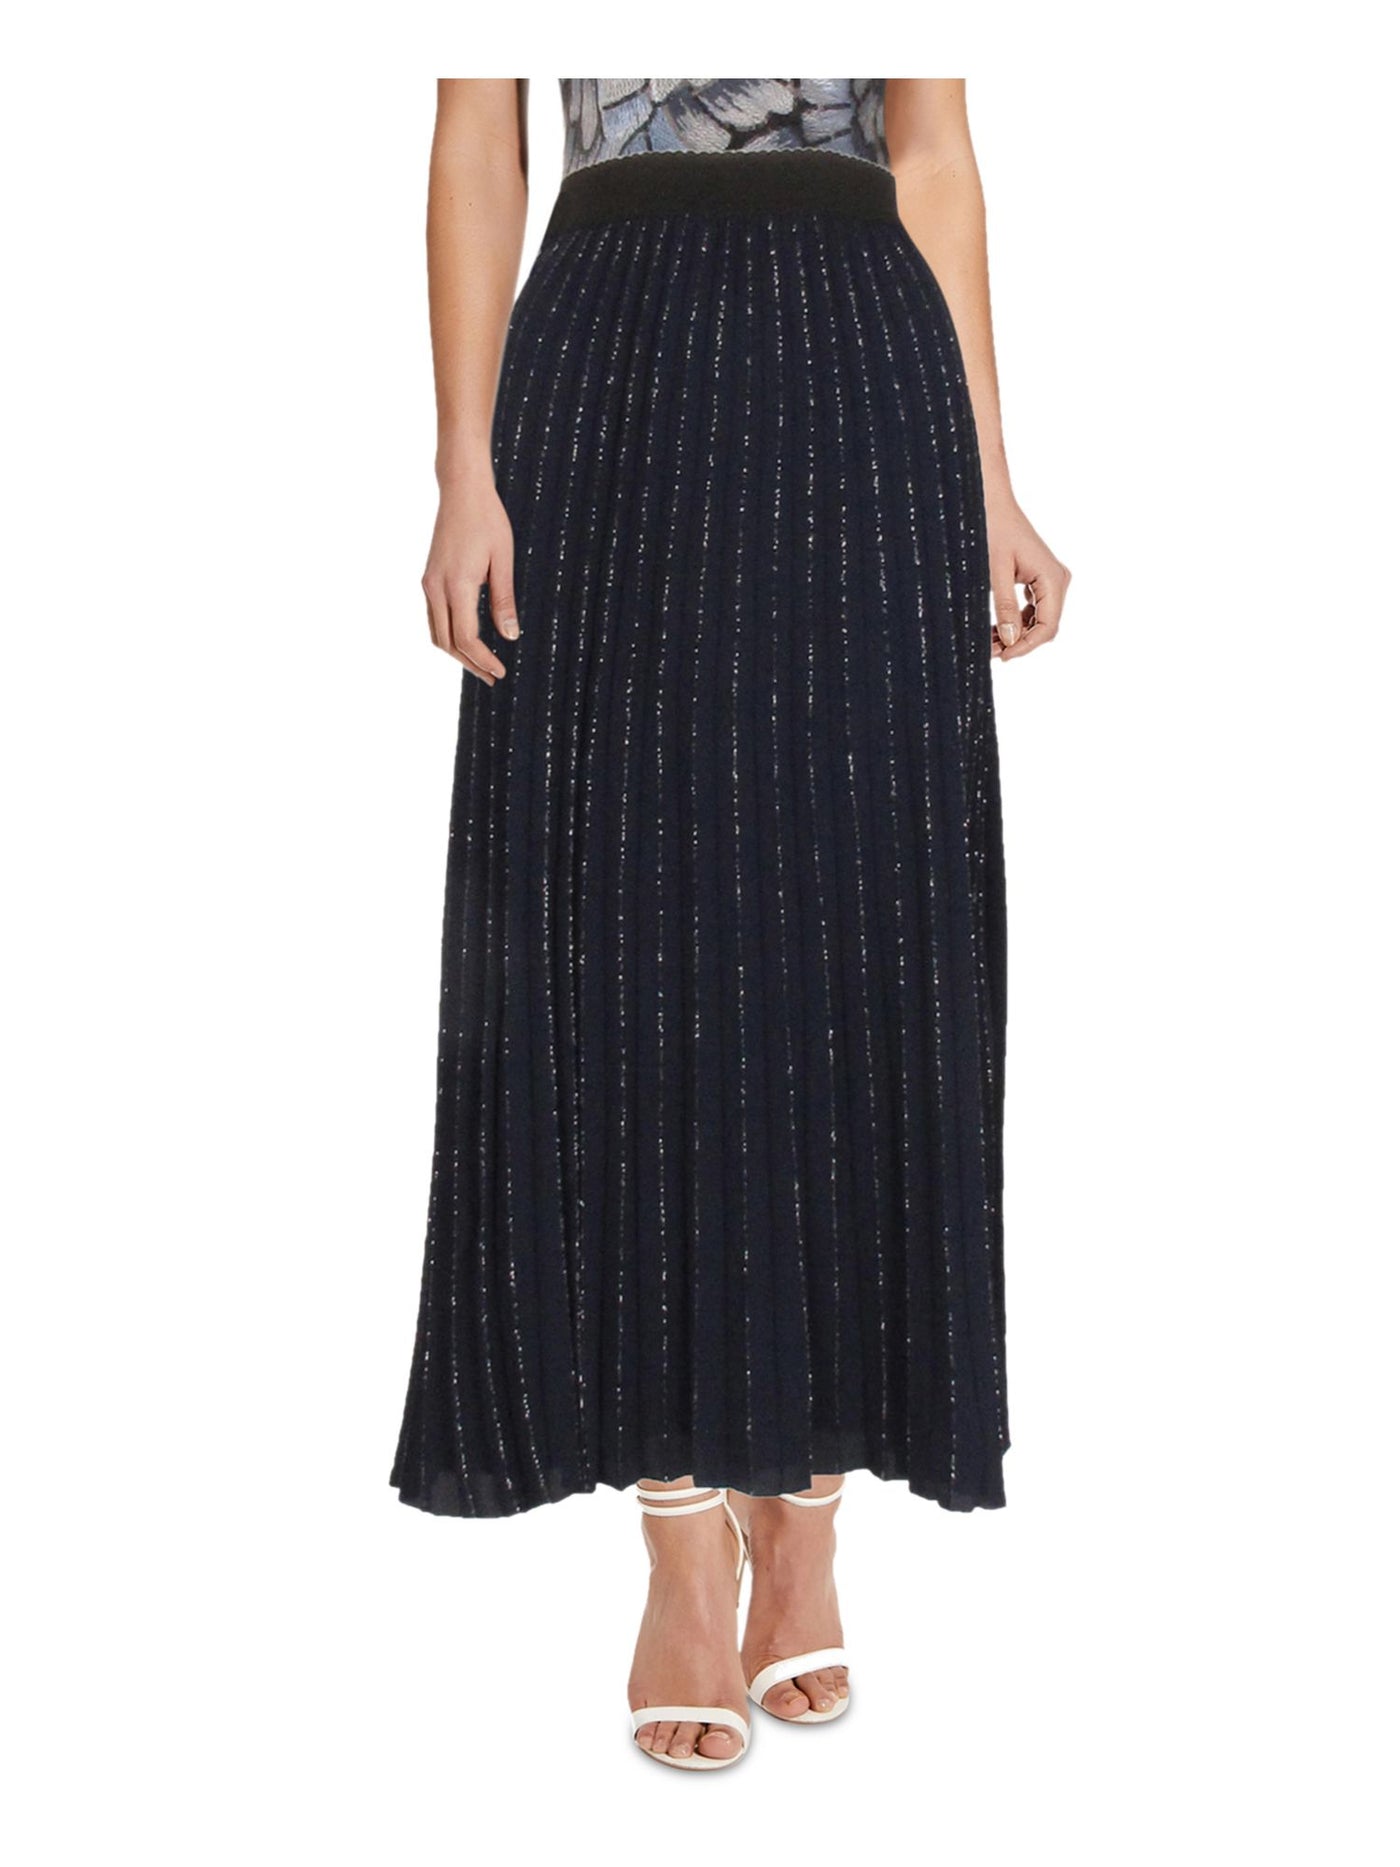 ADRIANNA PAPELL Womens Navy Metallic Pull On Styling Tea-Length Cocktail Pleated Skirt 14